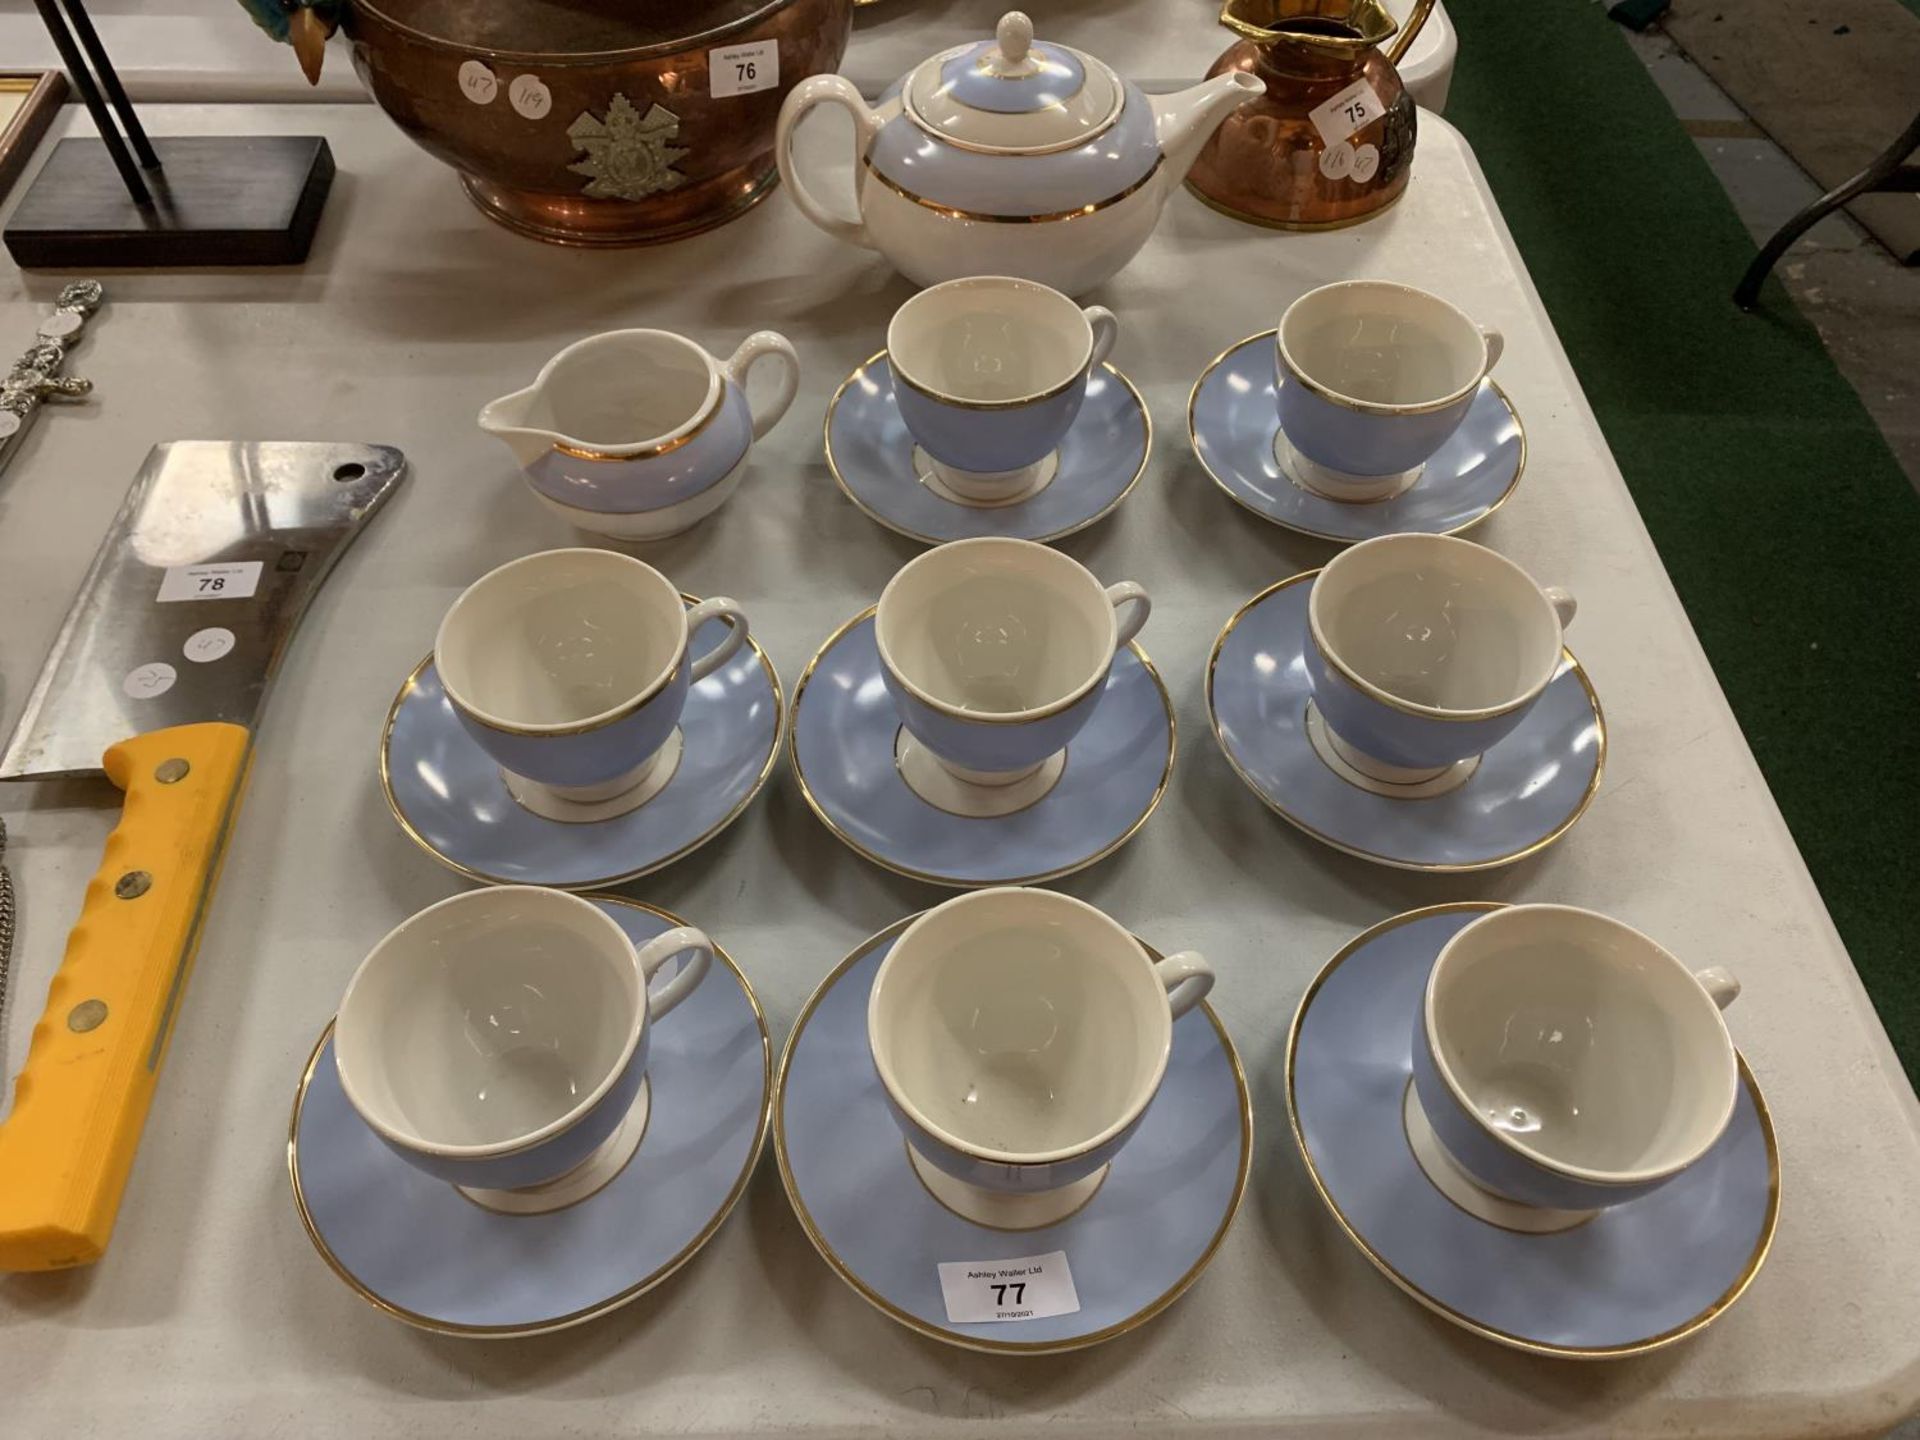 A ROYAL DOULTON EIGHTEEN PIECE PART TEASET TO INCLUDE CUPS, SAUCERS, CREAM JUG AND A TEAPOT